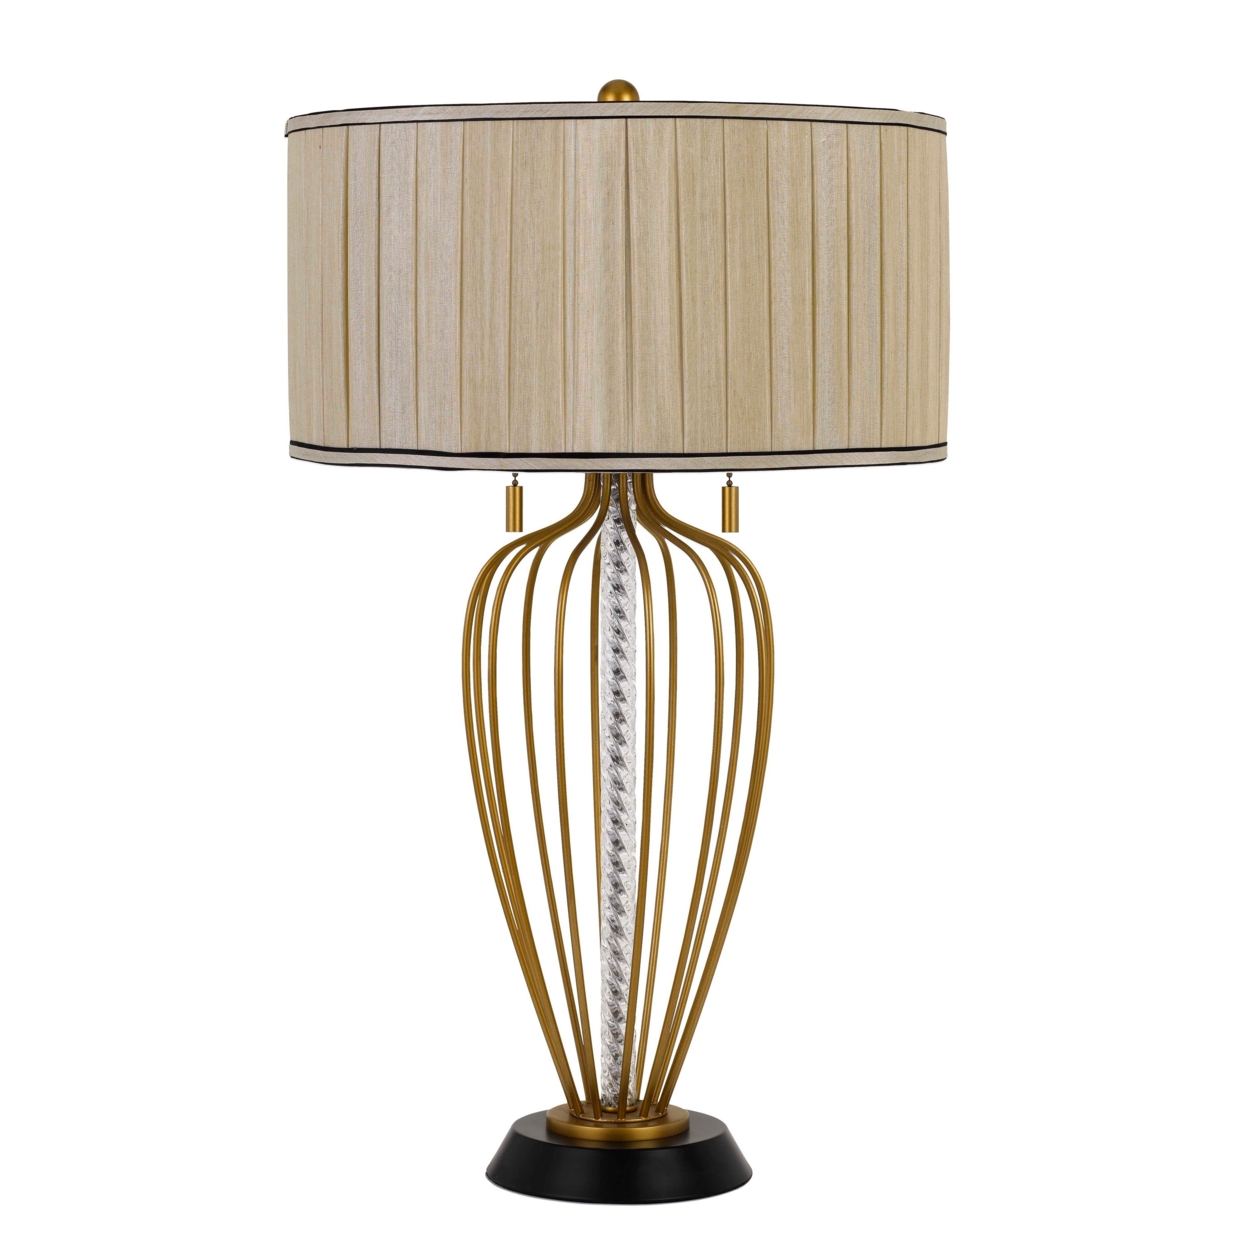 Pleated Drum Shade Table Lamp With Caged Urn Style Base, Black And Gold- Saltoro Sherpi